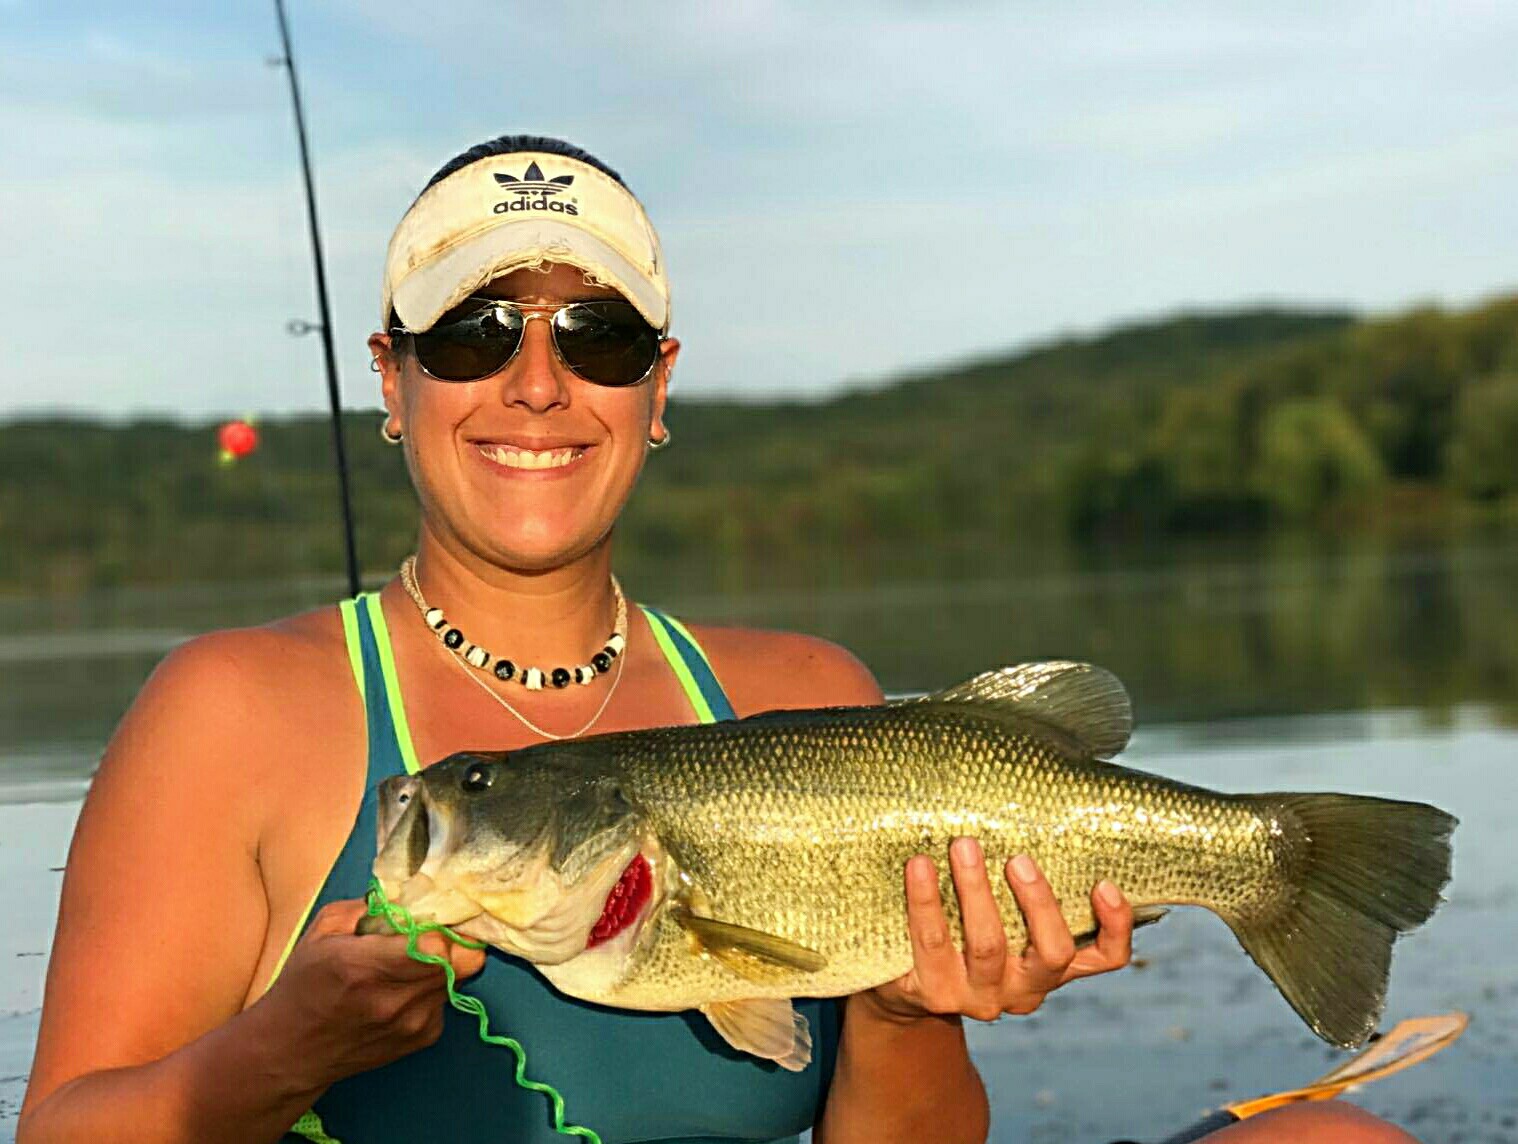 Katie with a 5 pound bass